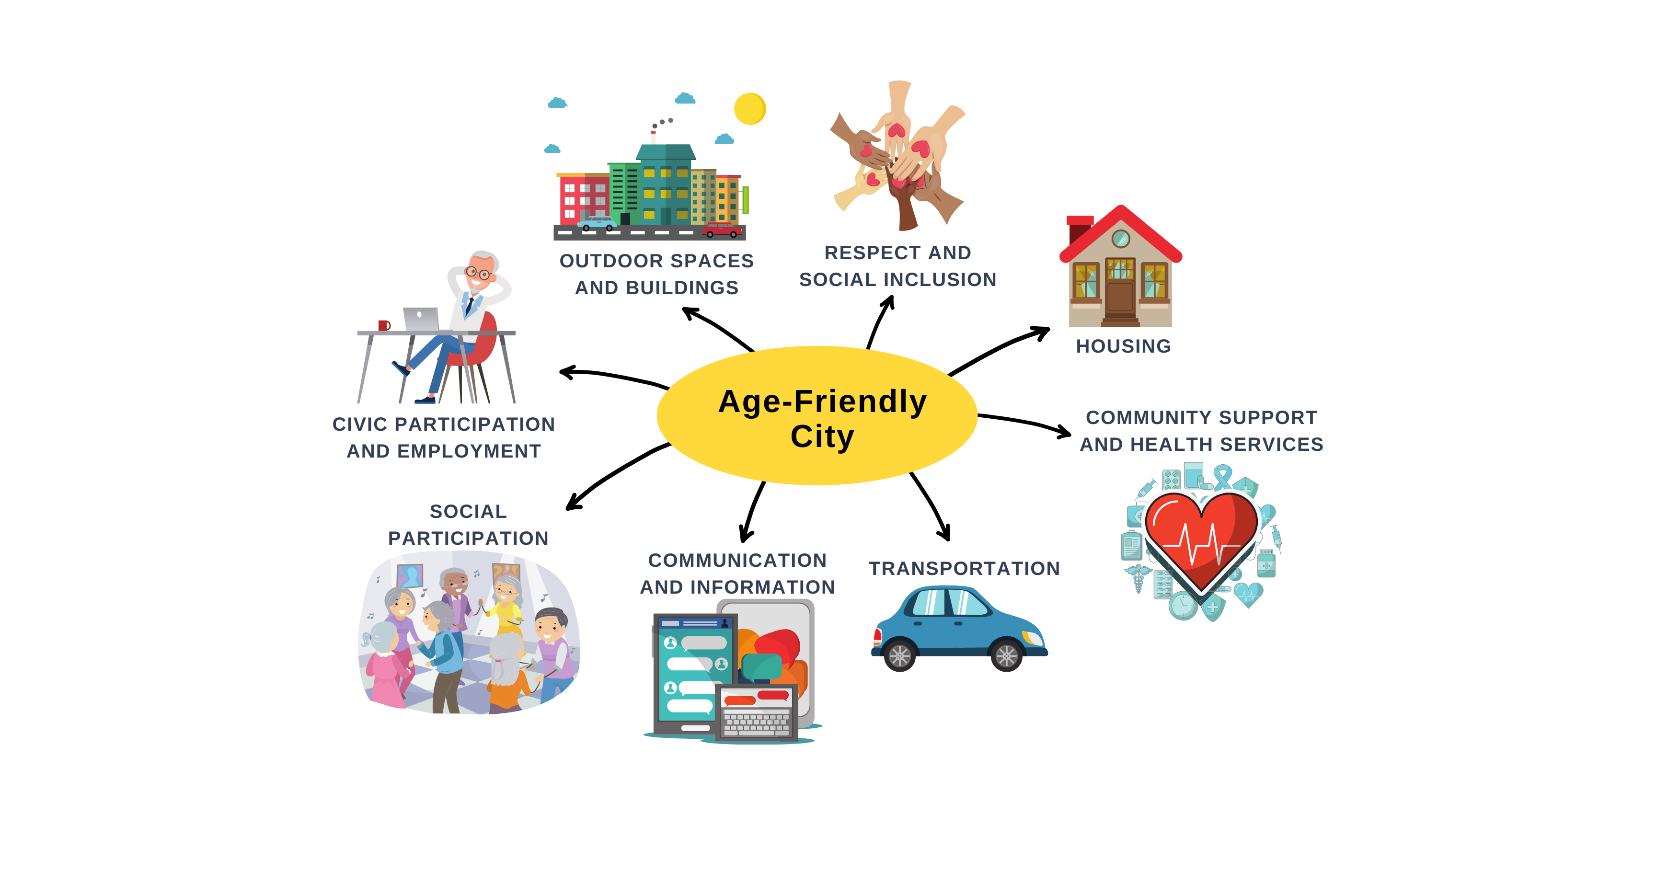 Image showing 8 domains of the Age-friendly city framework